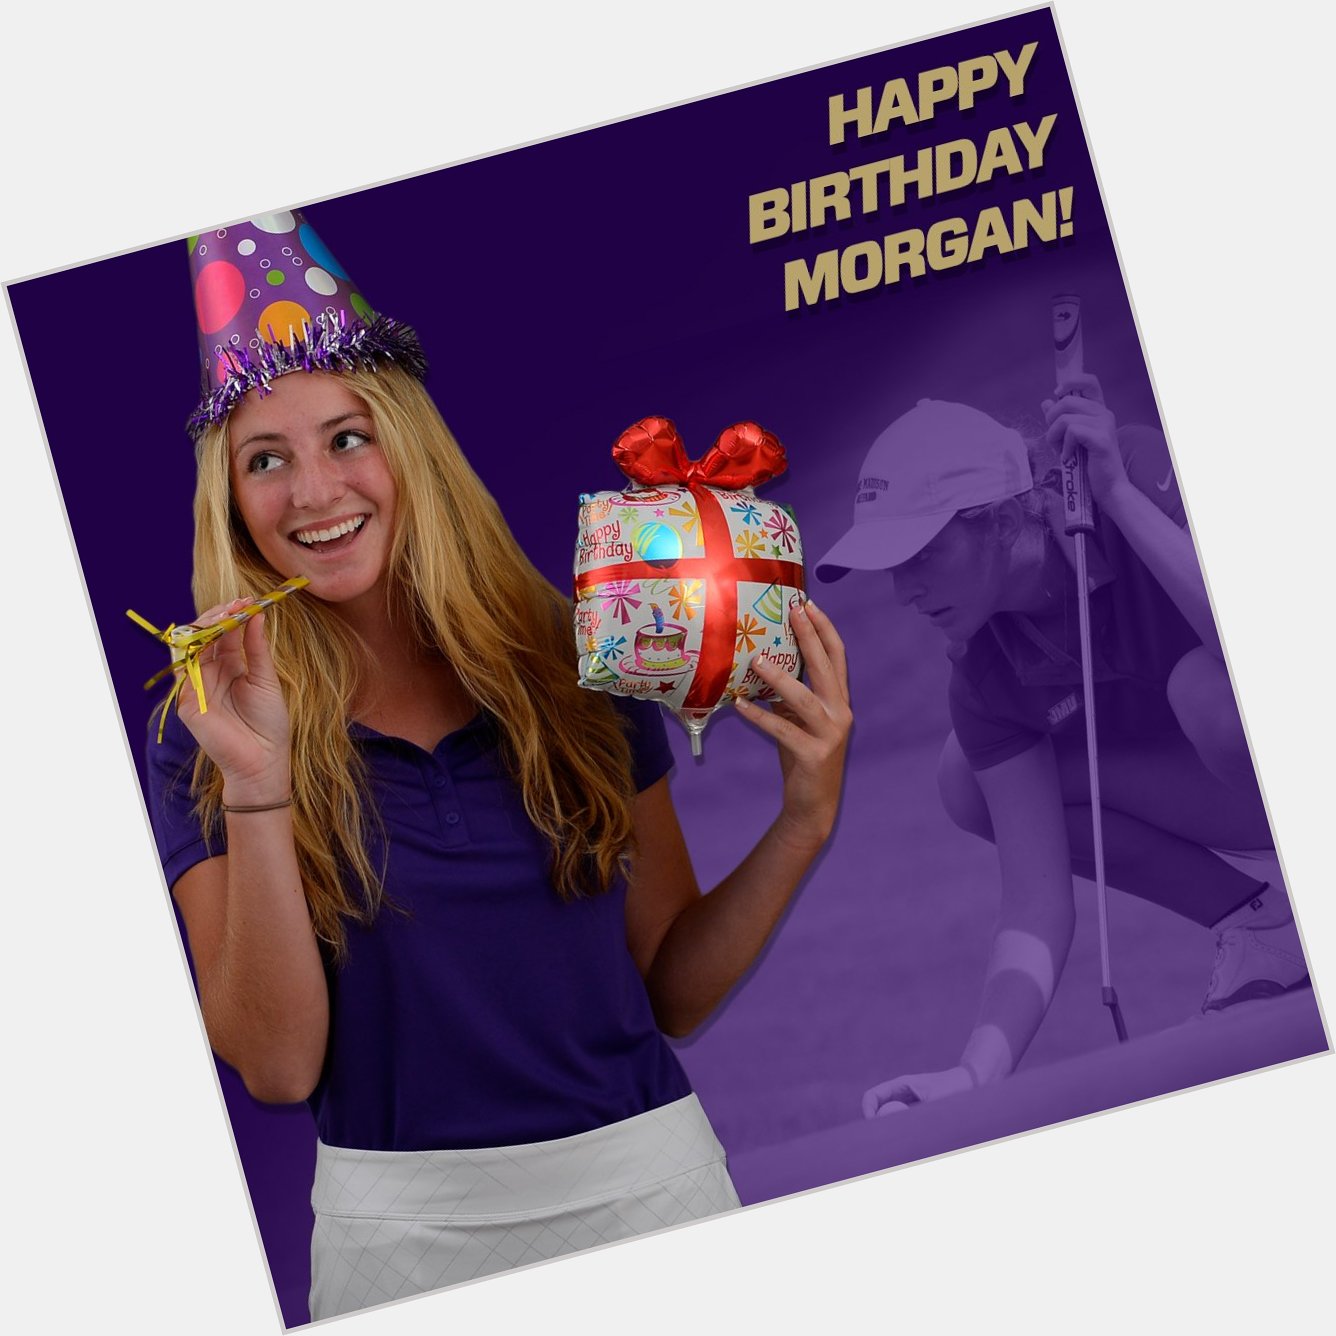 The Dukes are excited to wish a happy birthday today to Morgan Cox!

Happy Birthday, Morgan! 